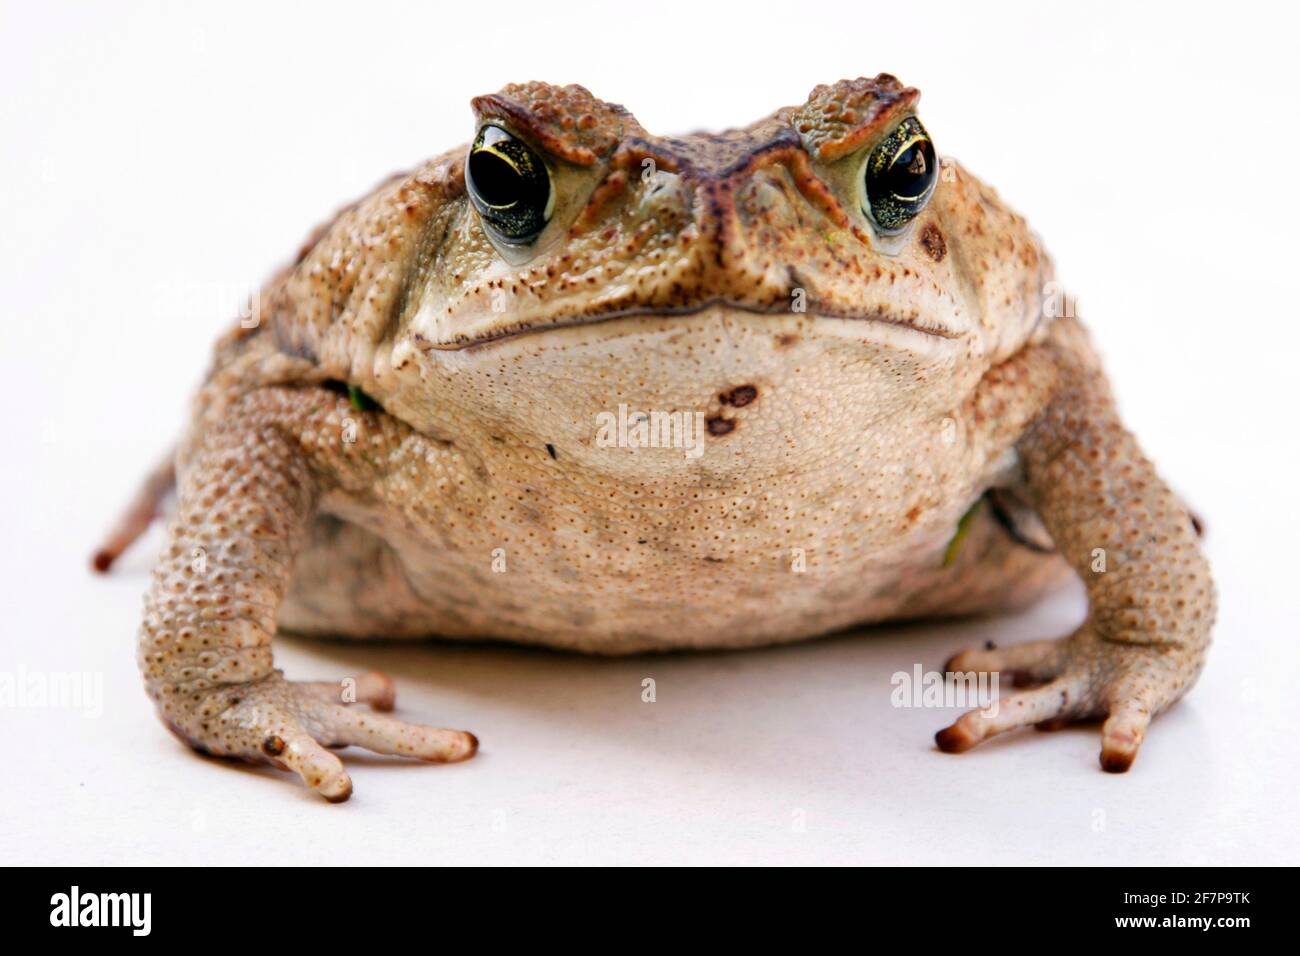 Giant toad, Marine toad, Cane toad, South American Neotropical toad (Bufo marinus, Rhinella marina), front view, cut-out Stock Photo